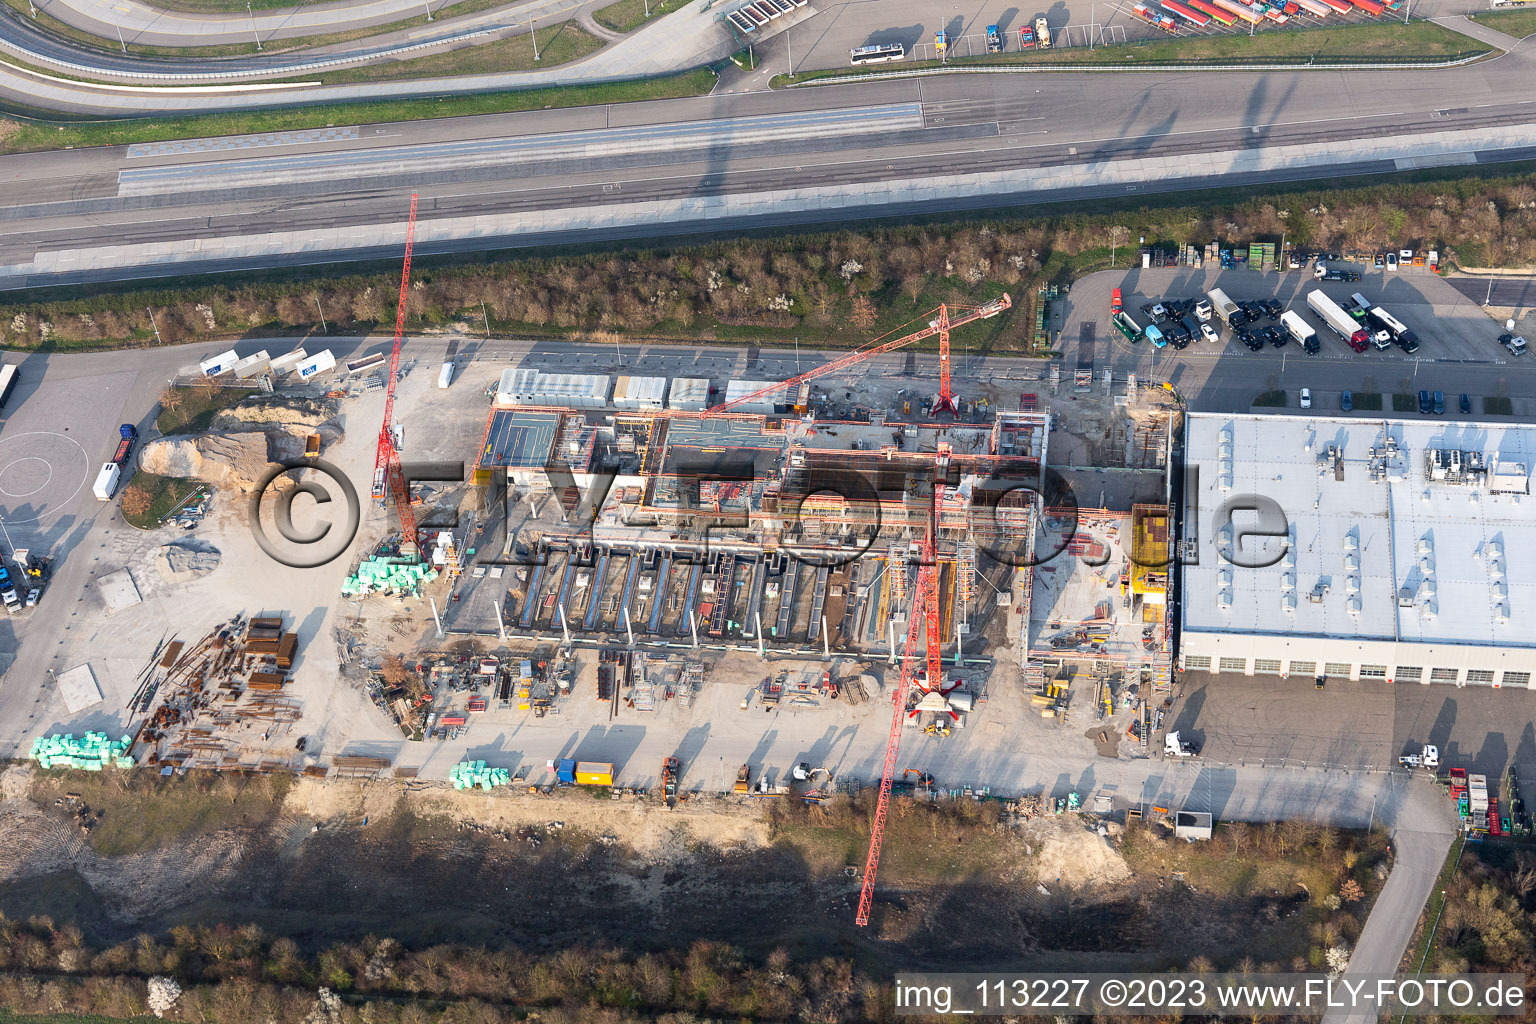 Aerial view of Construction site for the new building and Erweiterung of and expansion of the truck development and testing center in the district Industriegebiet Woerth-Oberwald in Woerth am Rhein in the state Rhineland-Palatinate, Germany